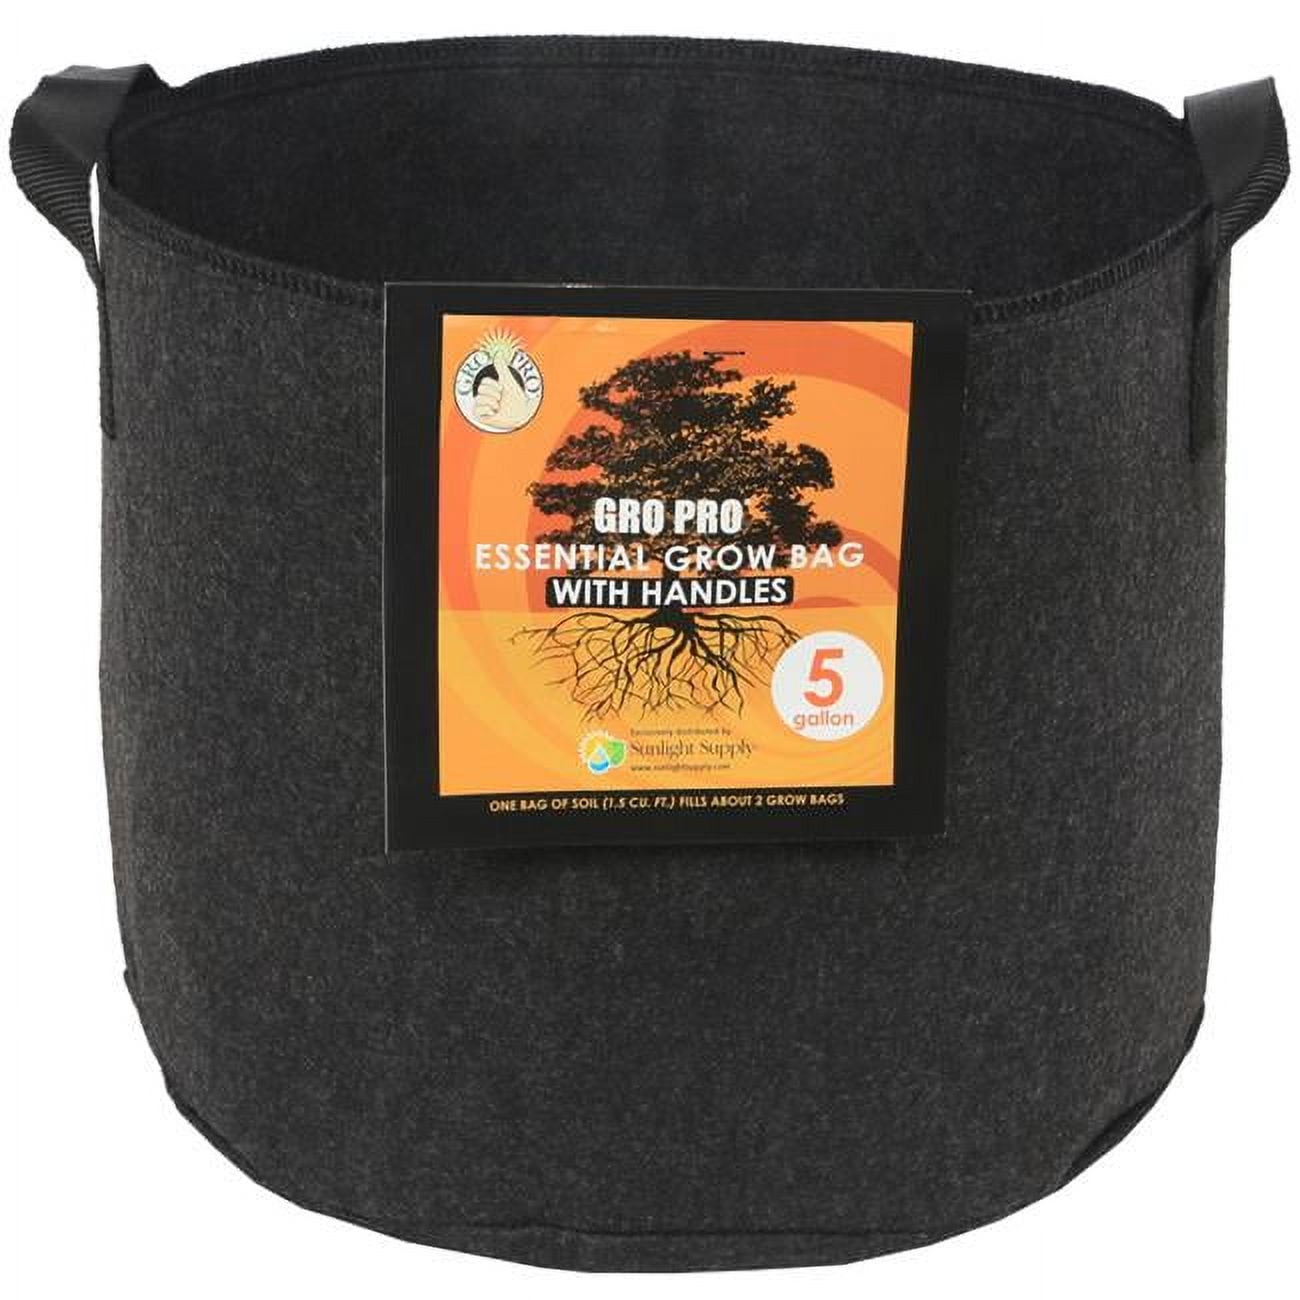 Picture of Gro Pro 7002842 5 gal Essential Grow Bag